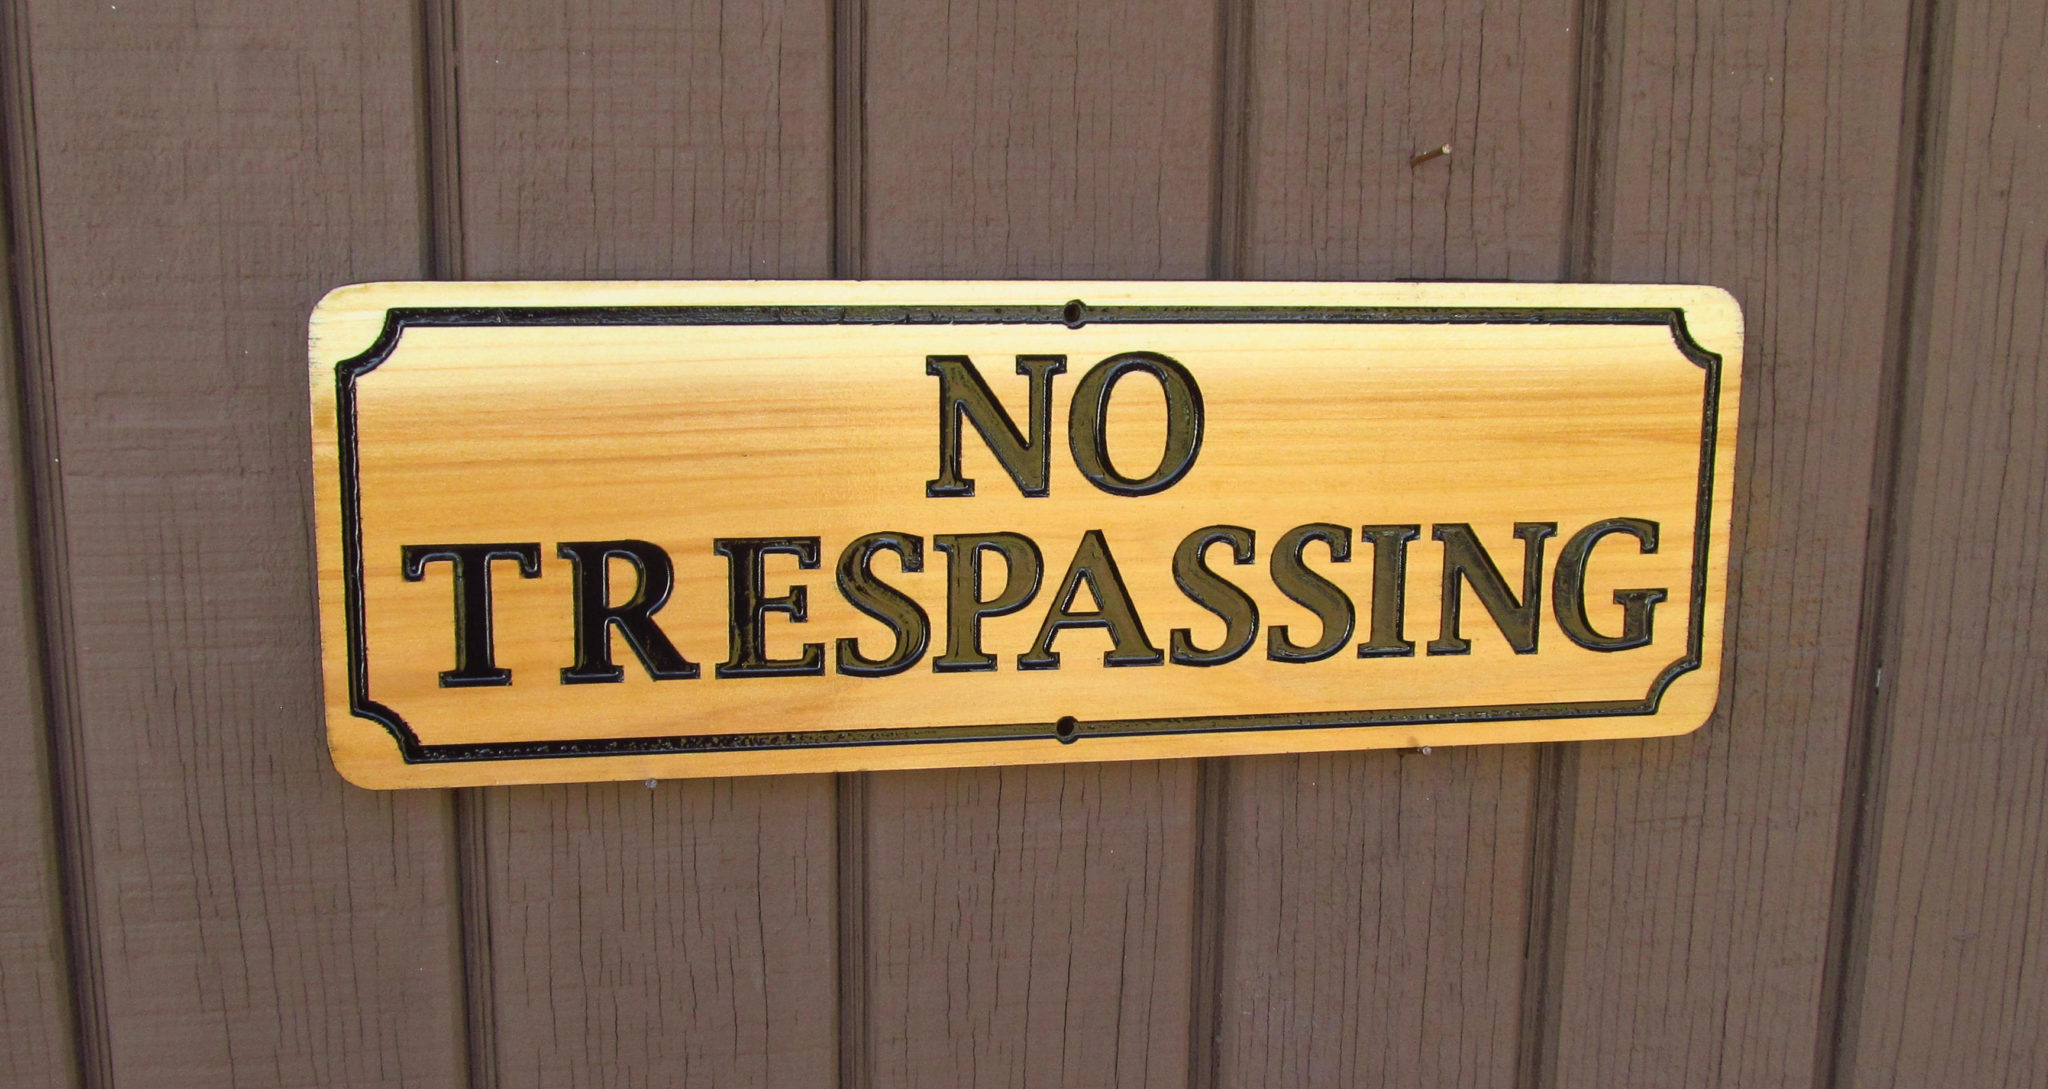 Can I Make My Own No Trespassing Sign